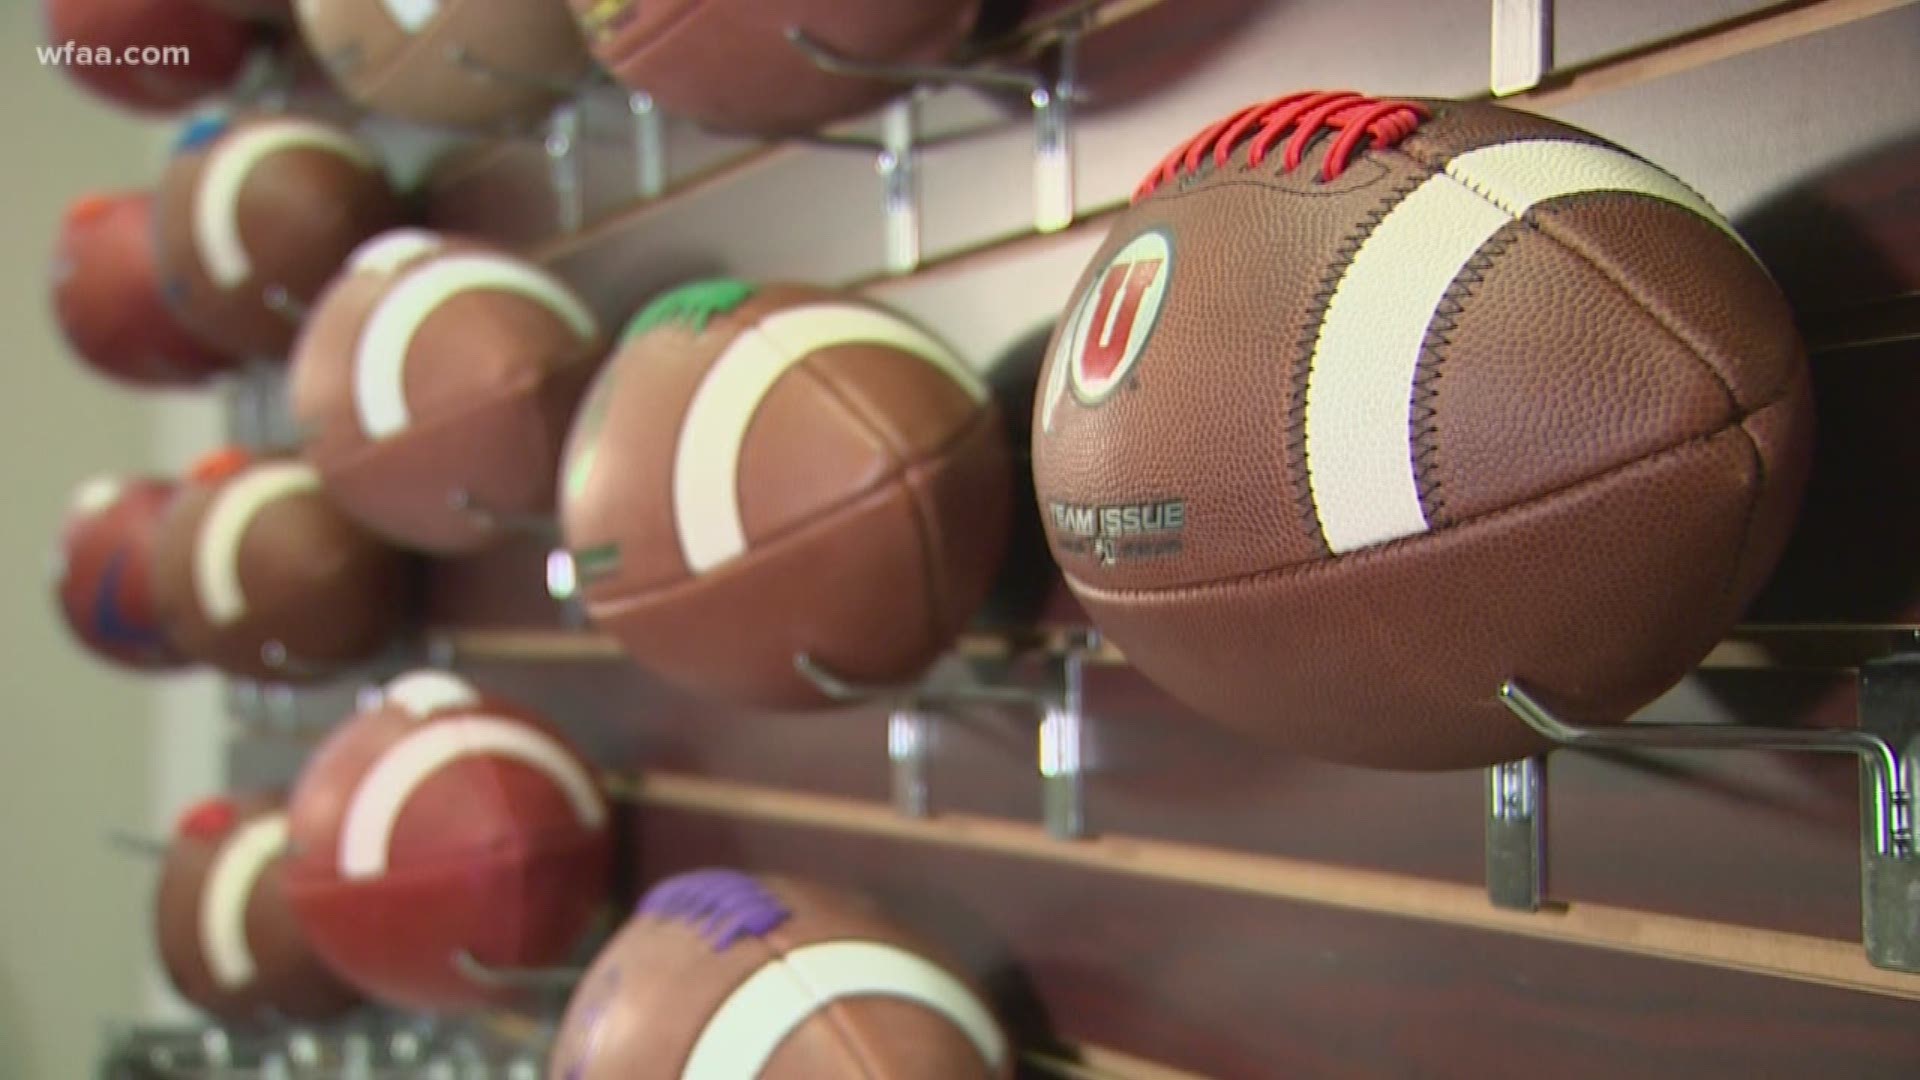 Big Game Football has become one of the nation's premier football factories.